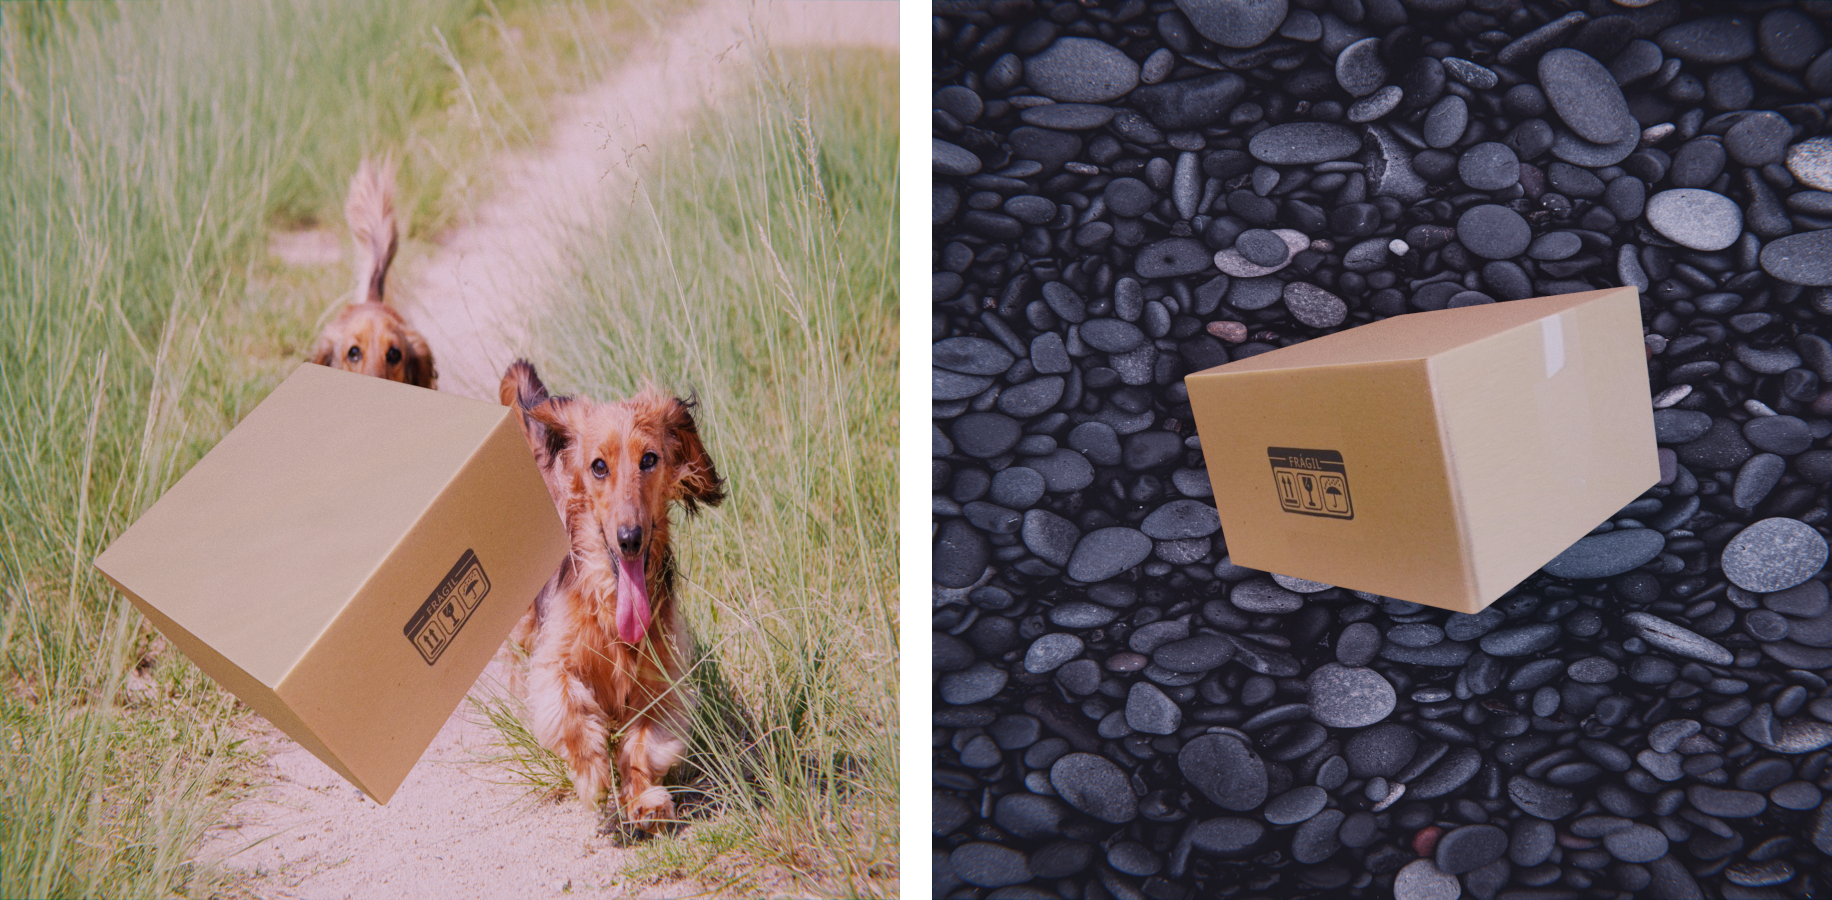 Packages depicted infront of dogs on a grassy meadow and in front of black rocks to train the model on what a package looks like